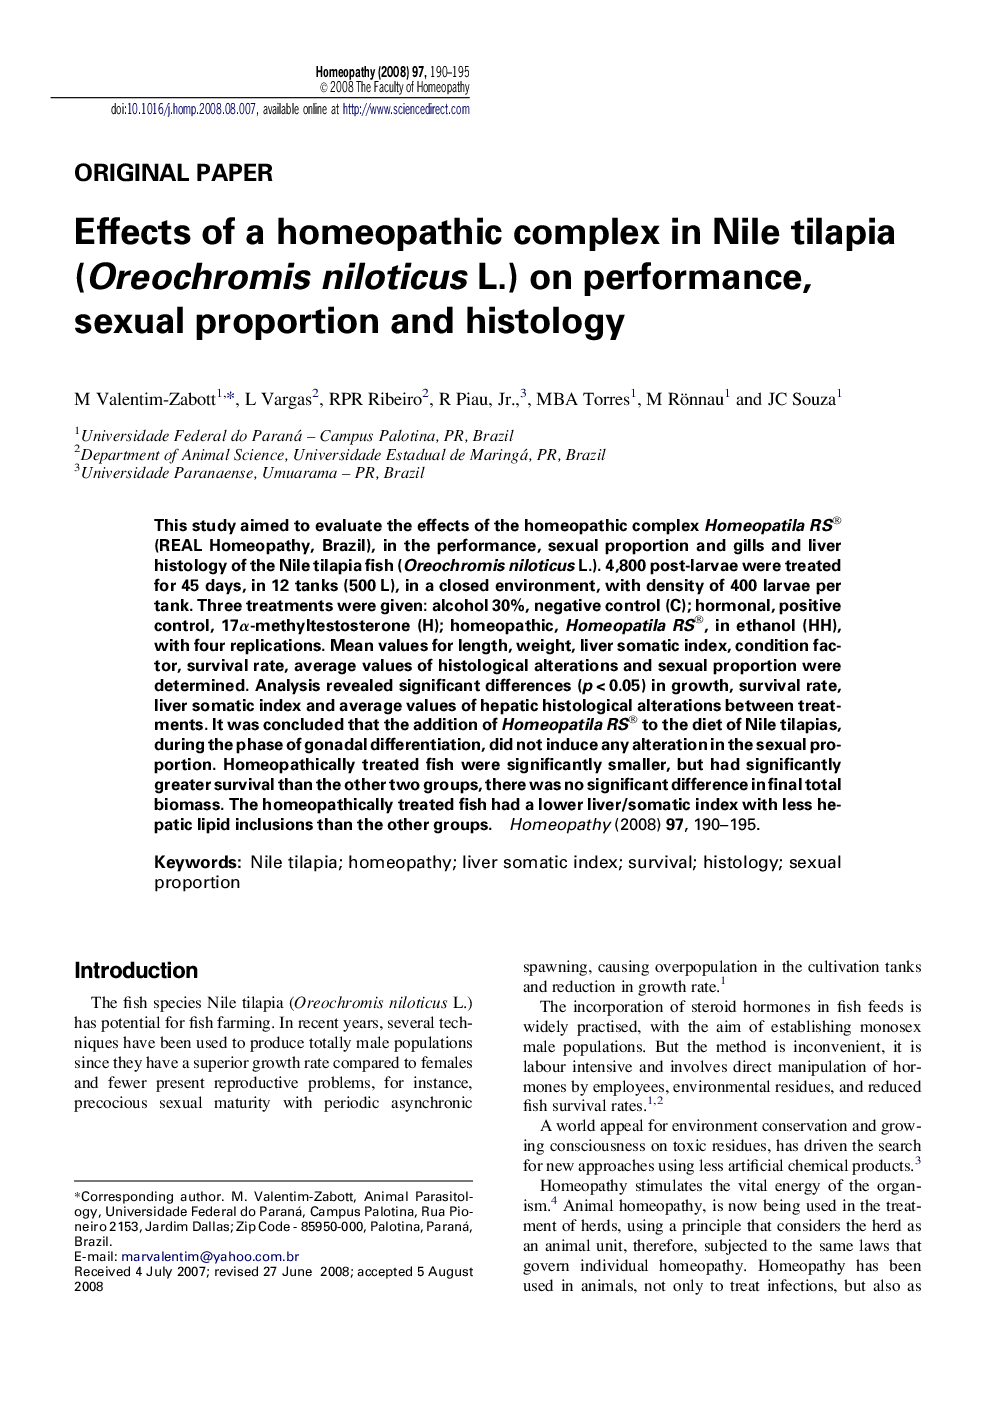 Effects of a homeopathic complex in Nile tilapia (Oreochromis niloticus L.) on performance, sexual proportion and histology